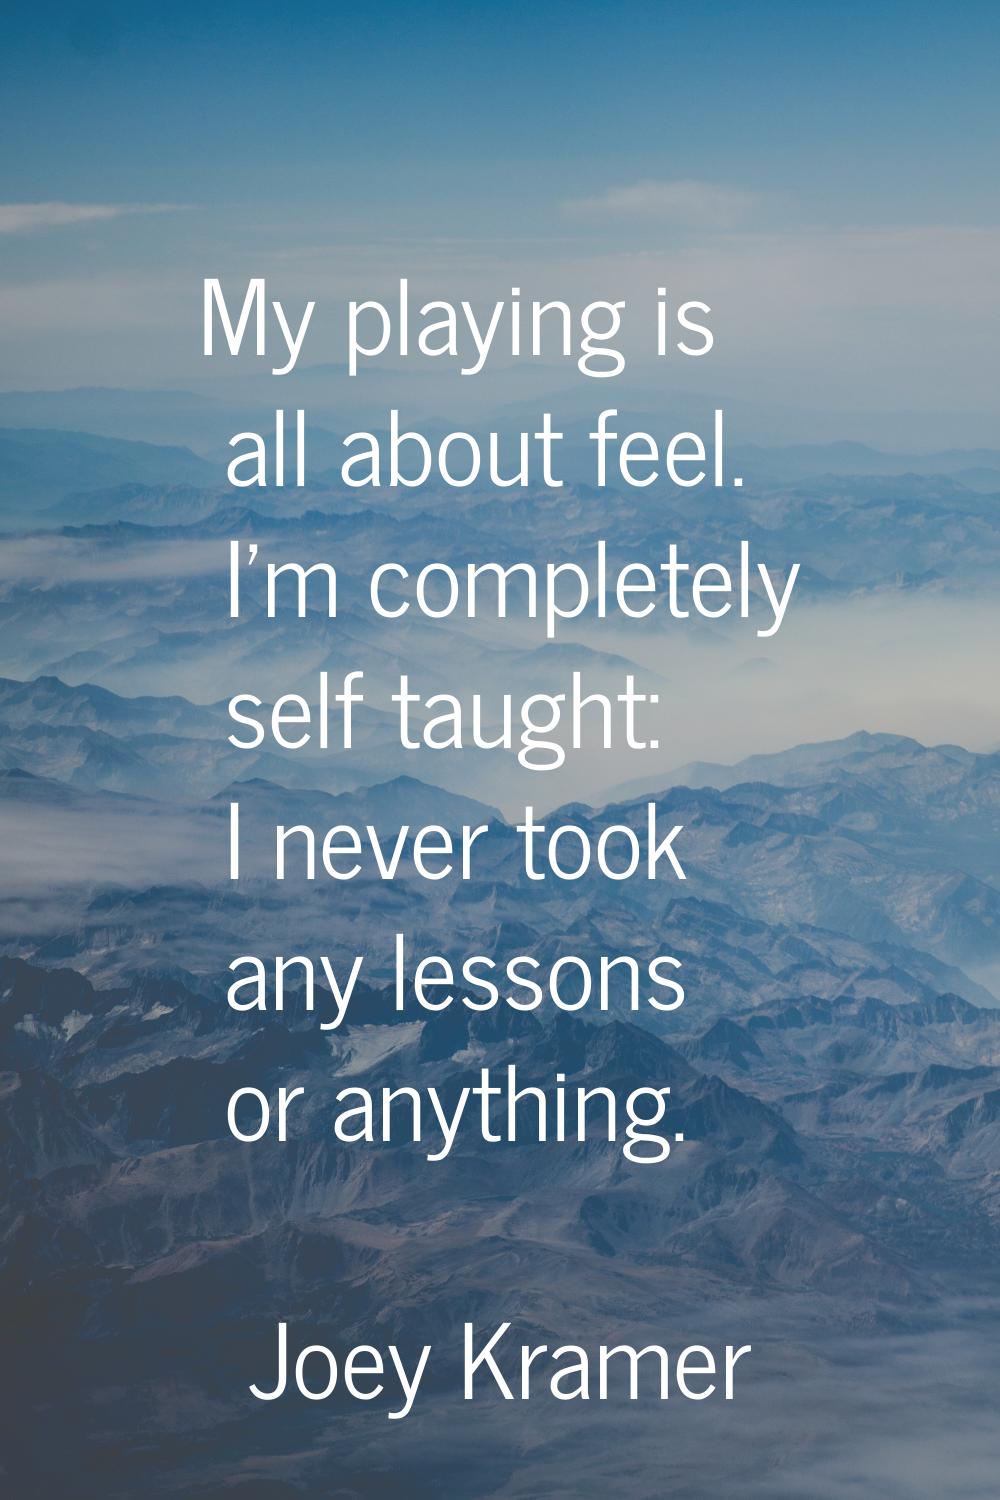 My playing is all about feel. I'm completely self taught: I never took any lessons or anything.